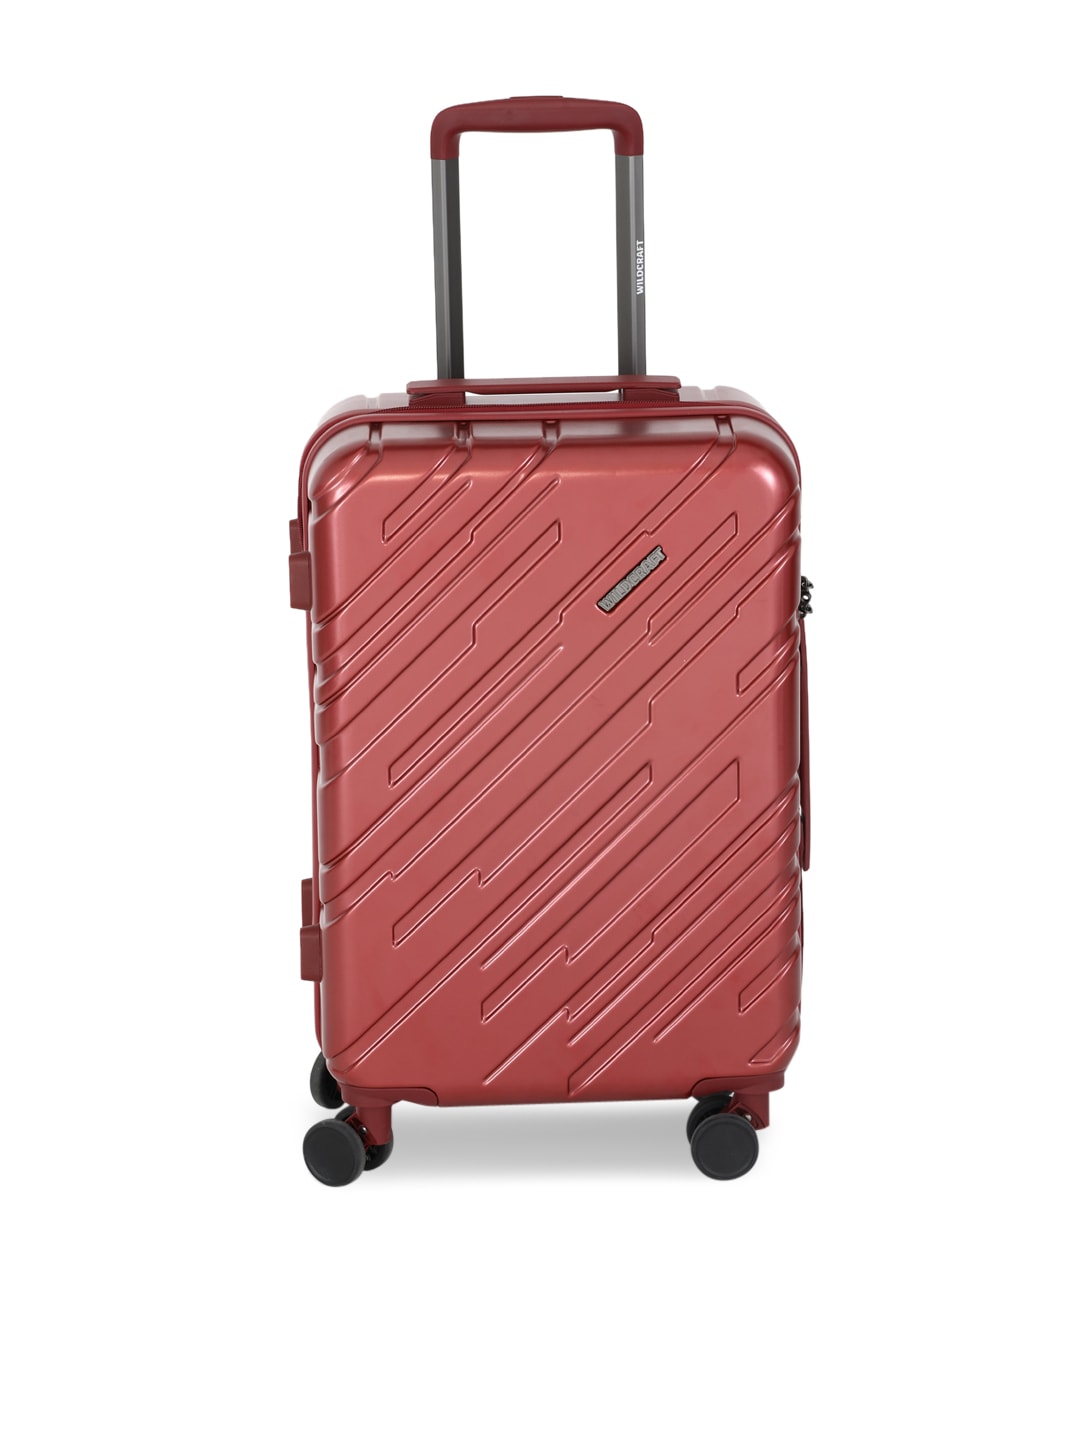 Wildcraft Red Cabin Trolley Bag Price in India